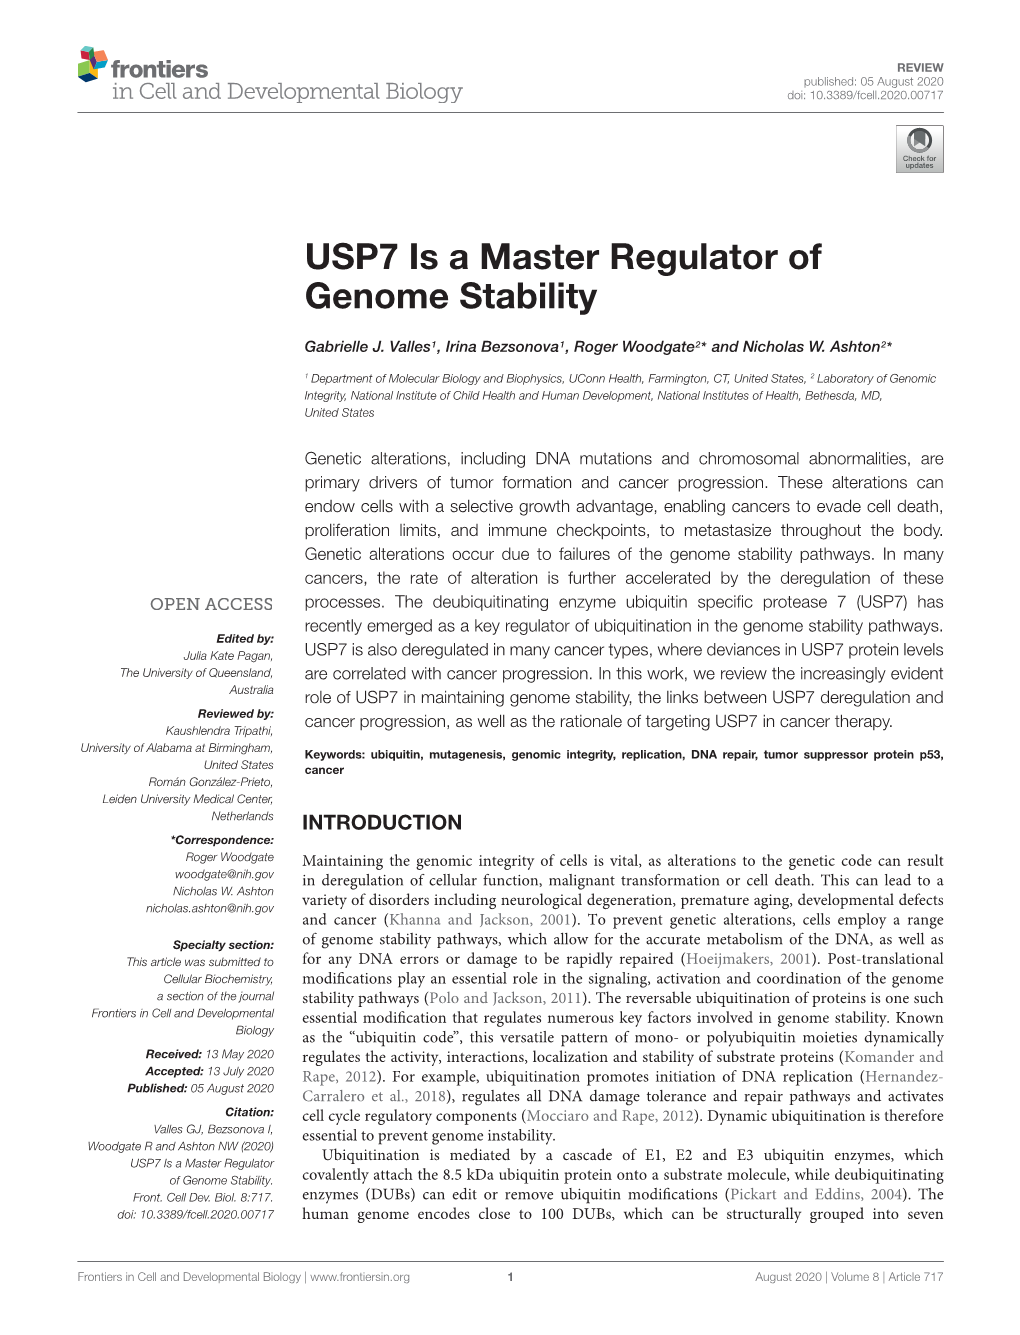 USP7 Is a Master Regulator of Genome Stability